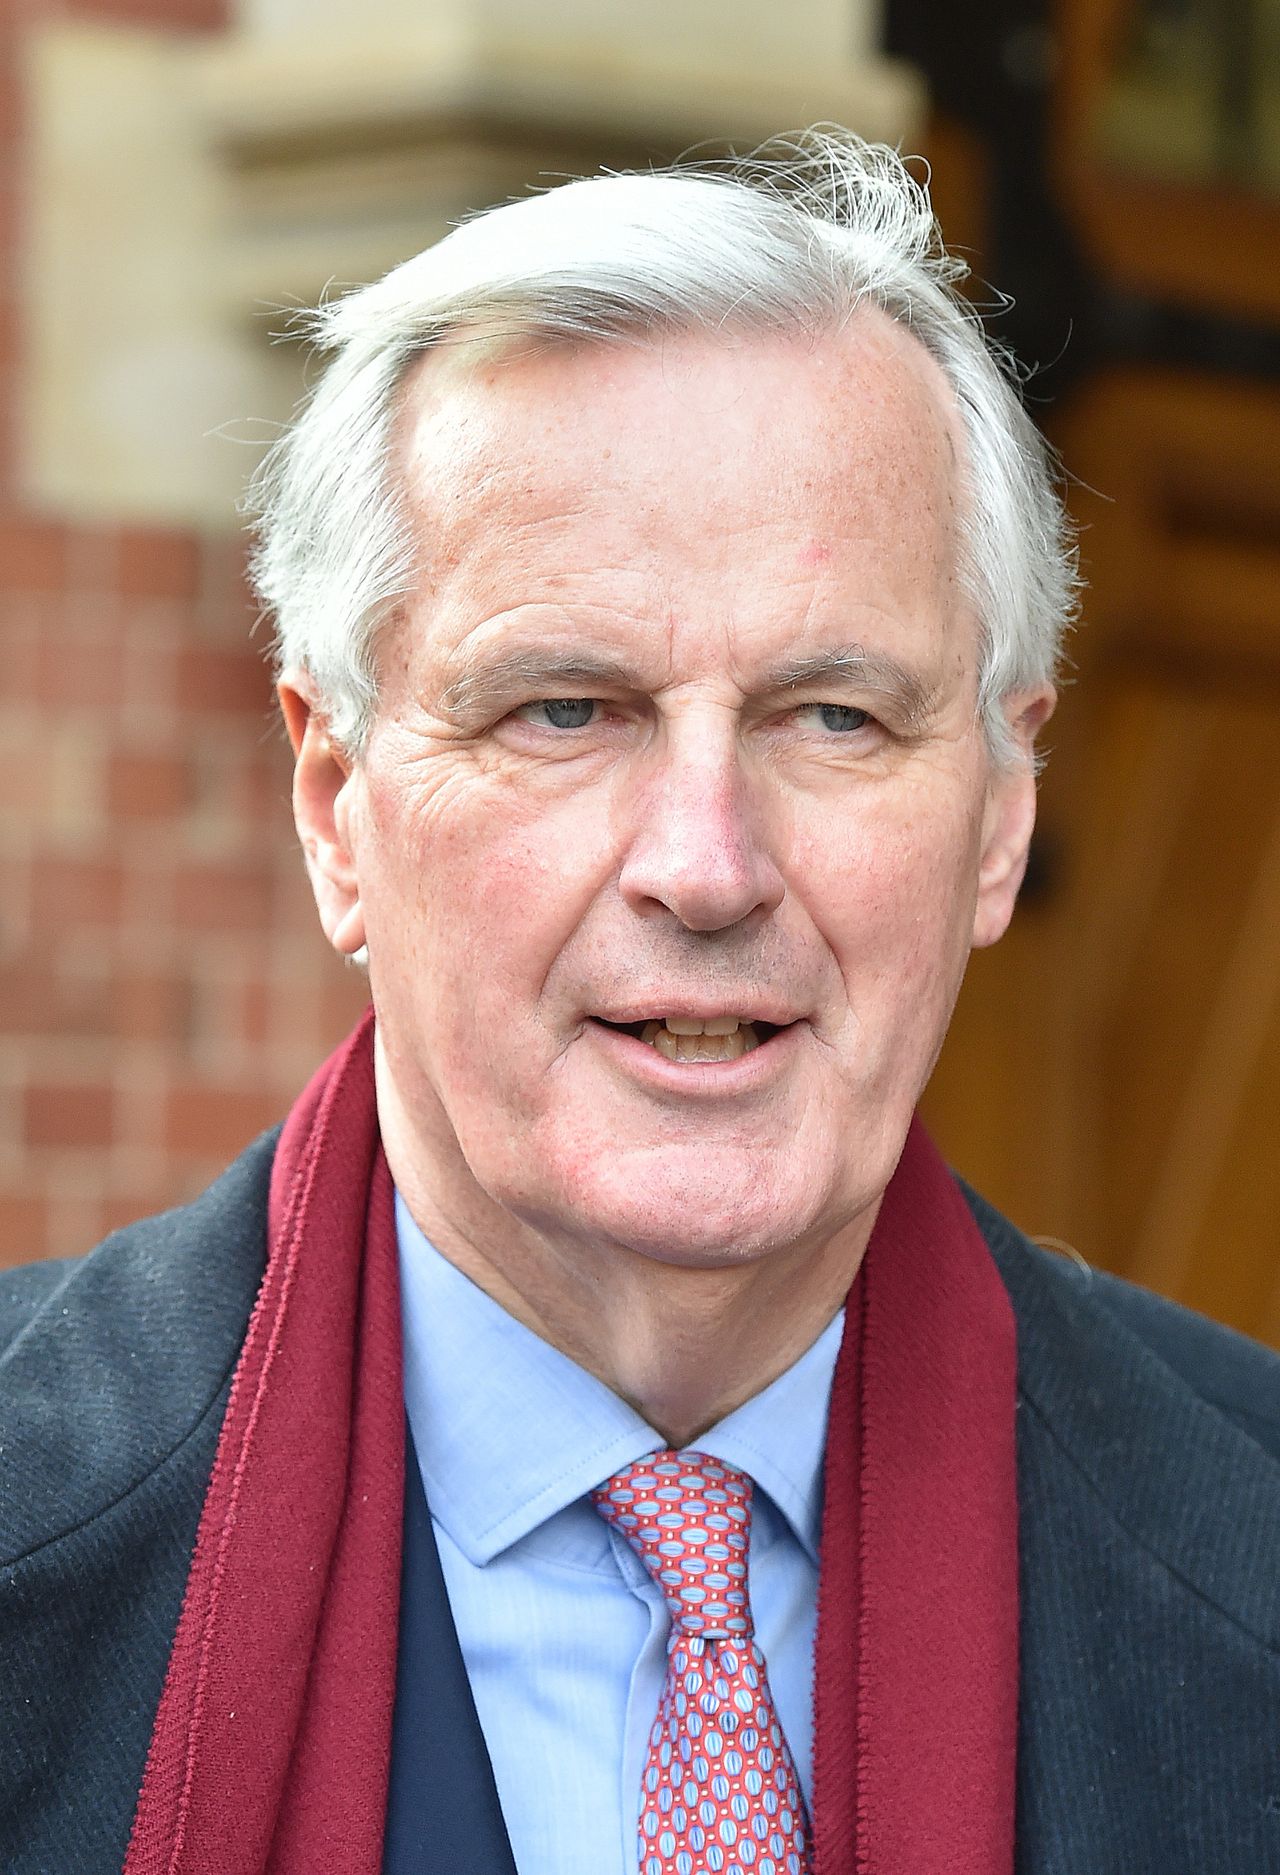 The EU’s Brexit negotiator Michel Barnier has repeatedly stressed the need to protect the GFA in any Brexit deal.